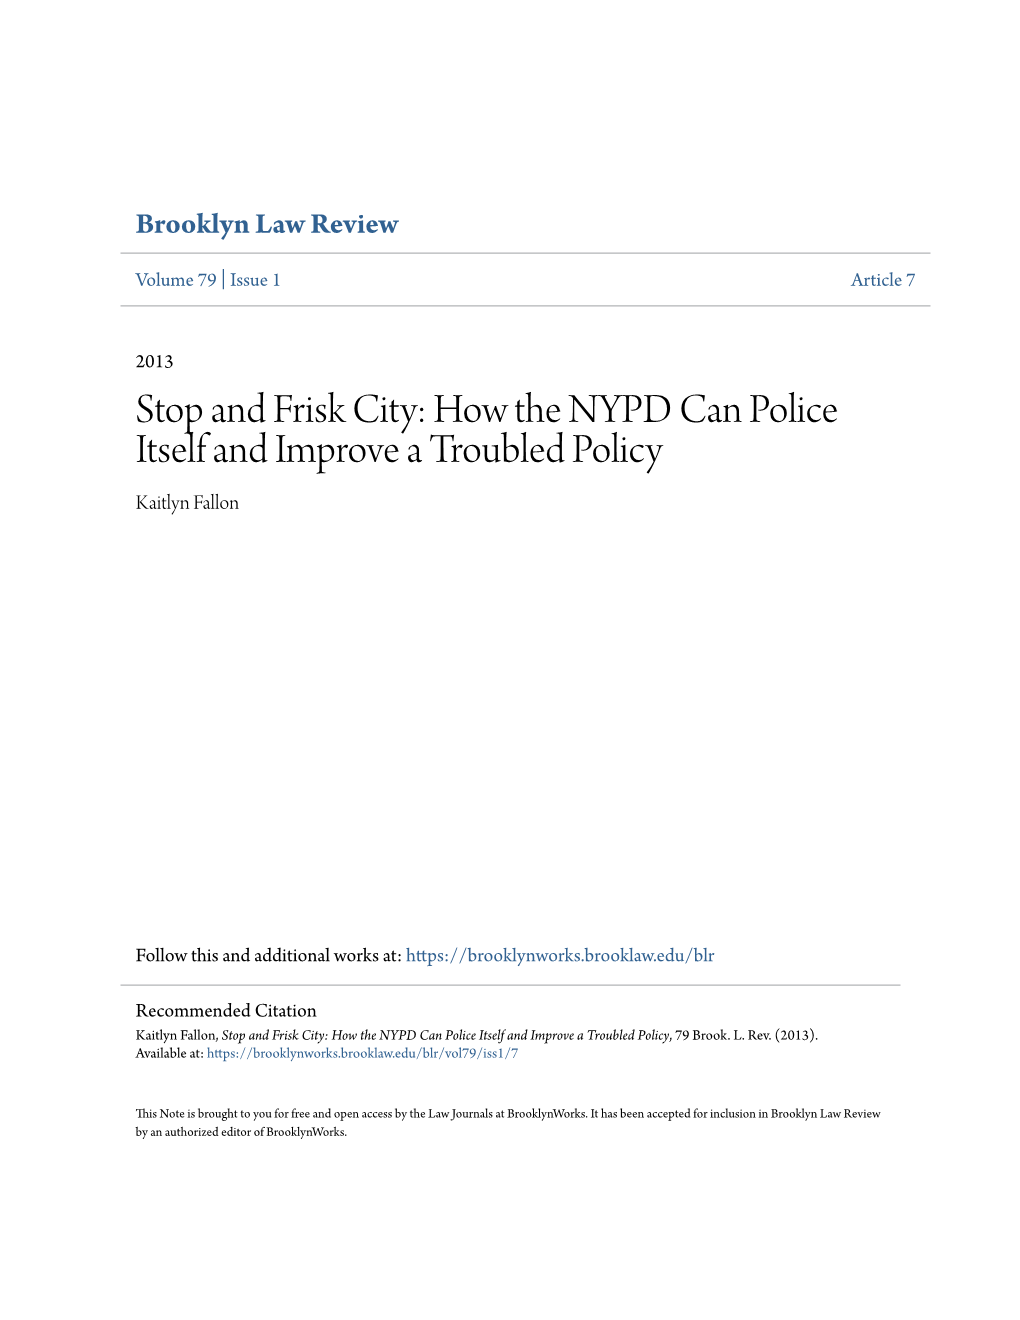 Stop and Frisk City: How the NYPD Can Police Itself and Improve a Troubled Policy Kaitlyn Fallon